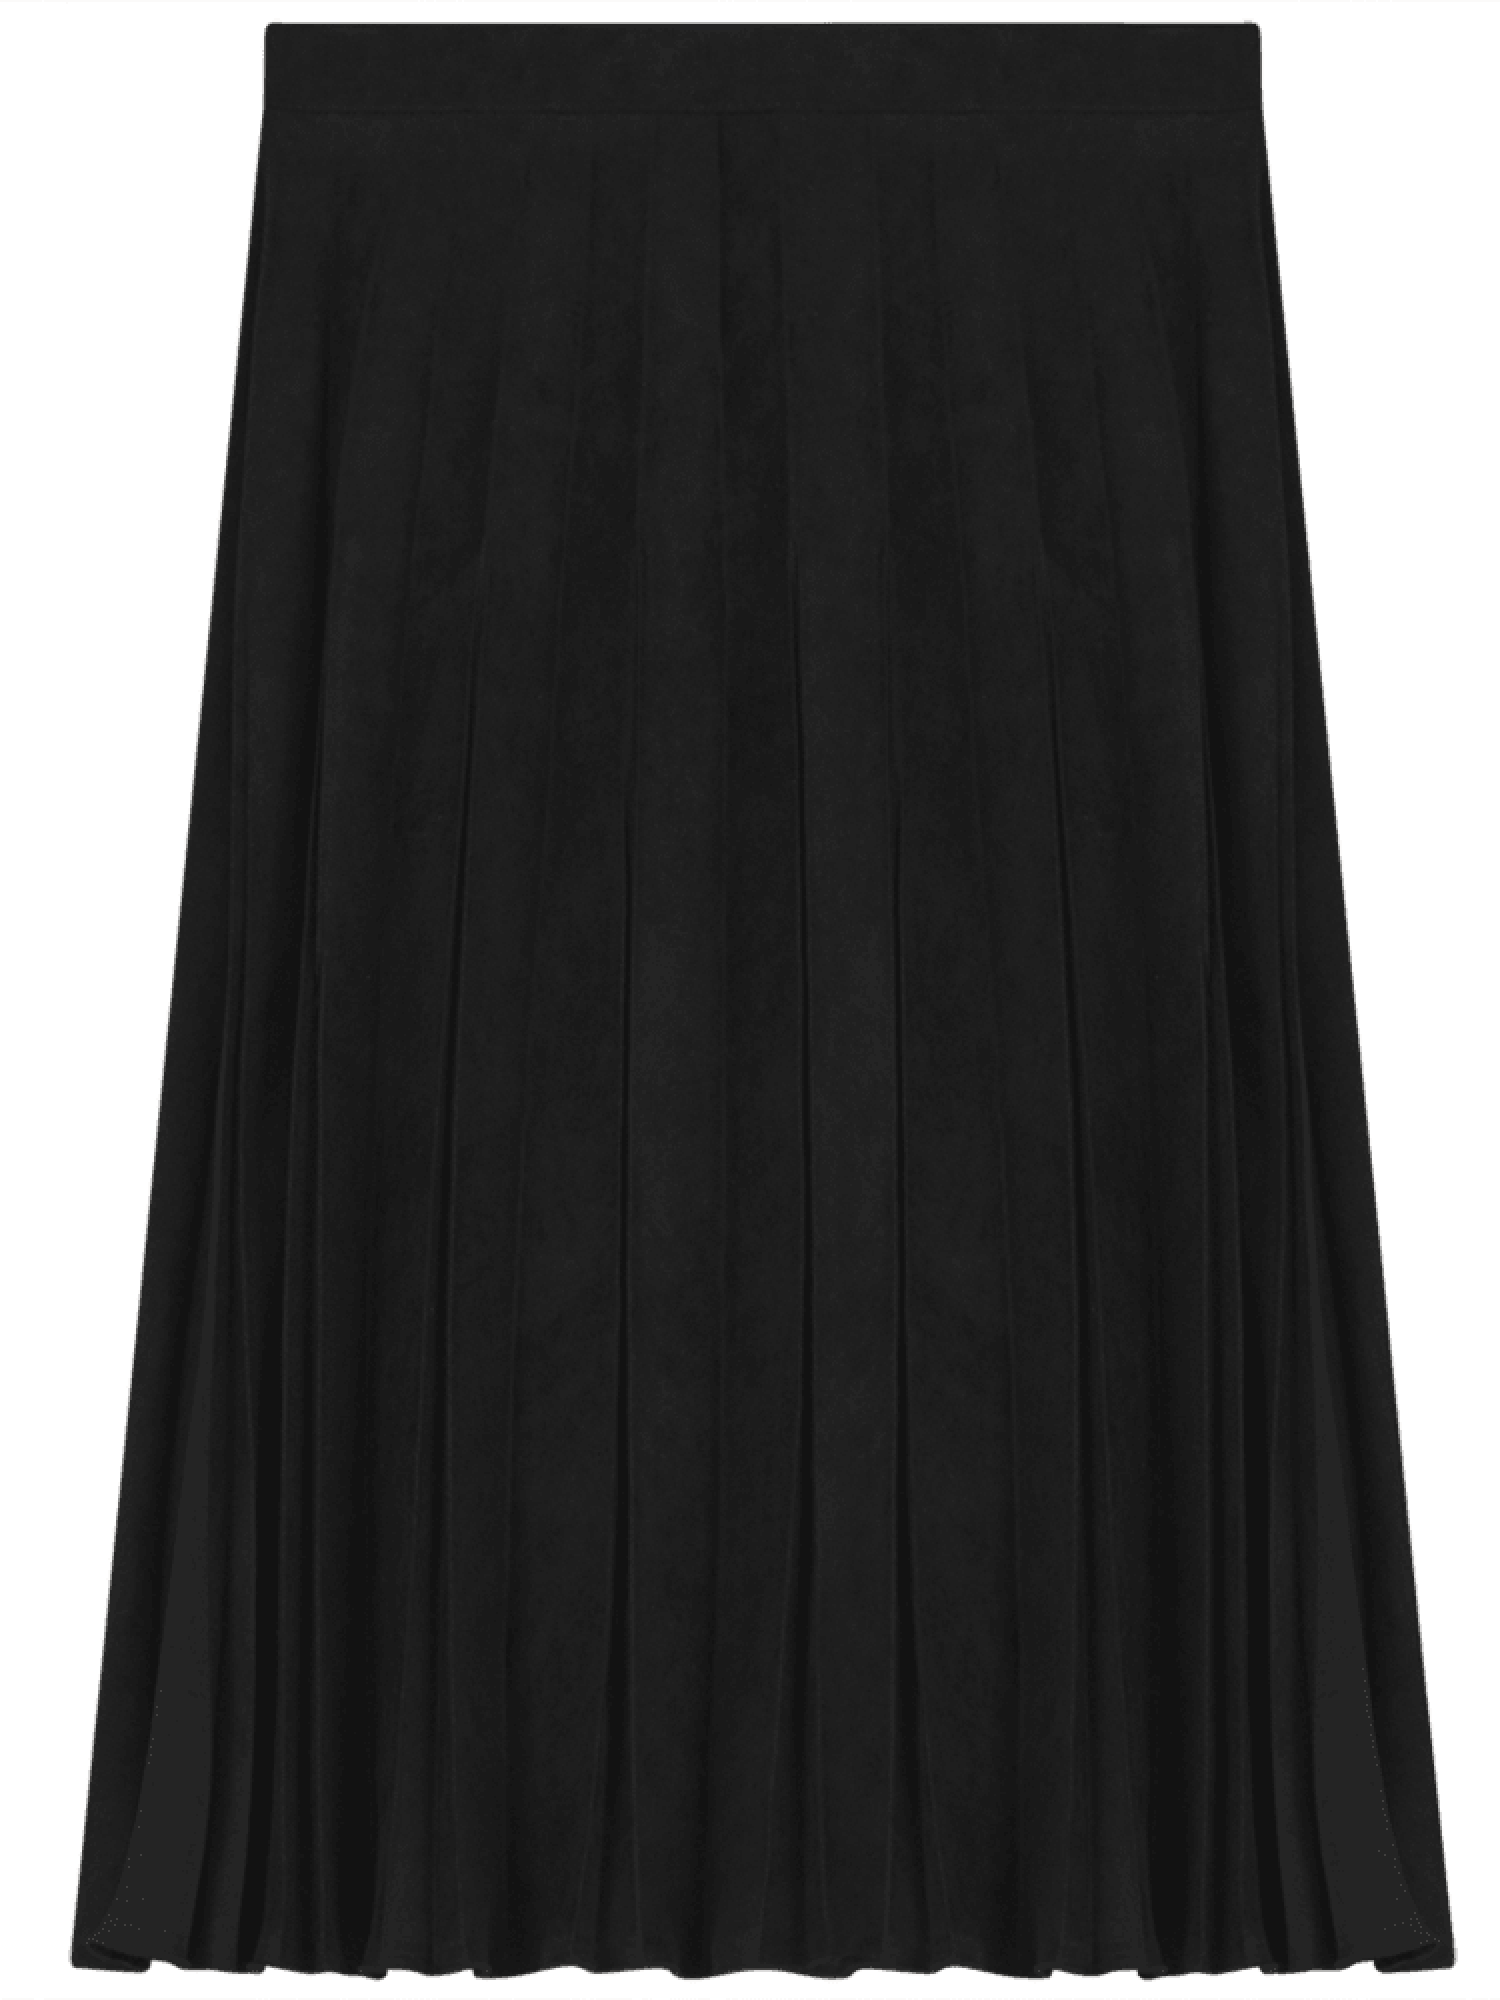 Ginger Suede Pleated Knee Length Skirt - Black or Chocolate